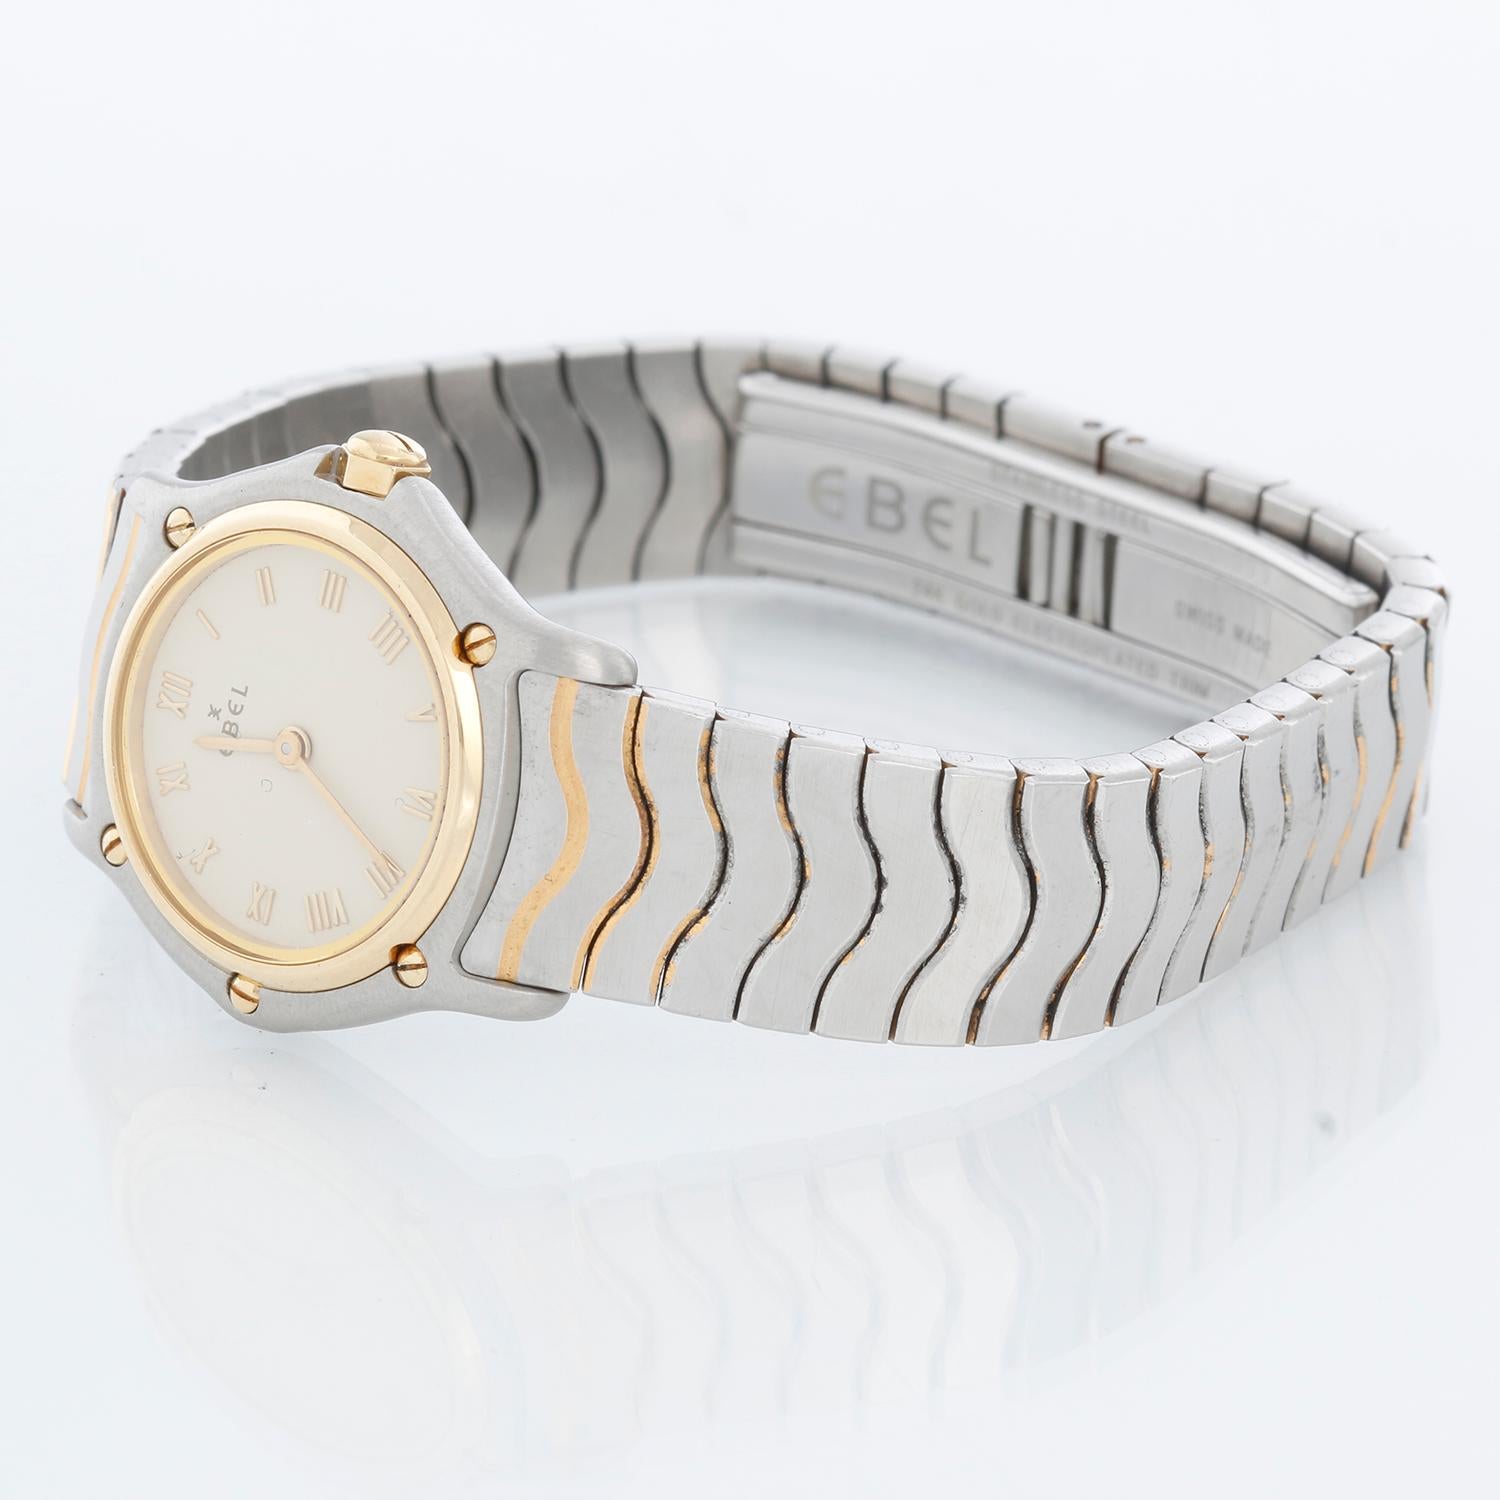 Ladies Ebel Sport Classique Steel & 18k Gold 23mm White Dial Quartz - quartz movement. Stainless steel and 18k yellow gold (23 mm ) . White dial with Roman numerals . Stainless steel and 18k yellow gold bracelet; will fit a 6 inch wrist . Pre-owned